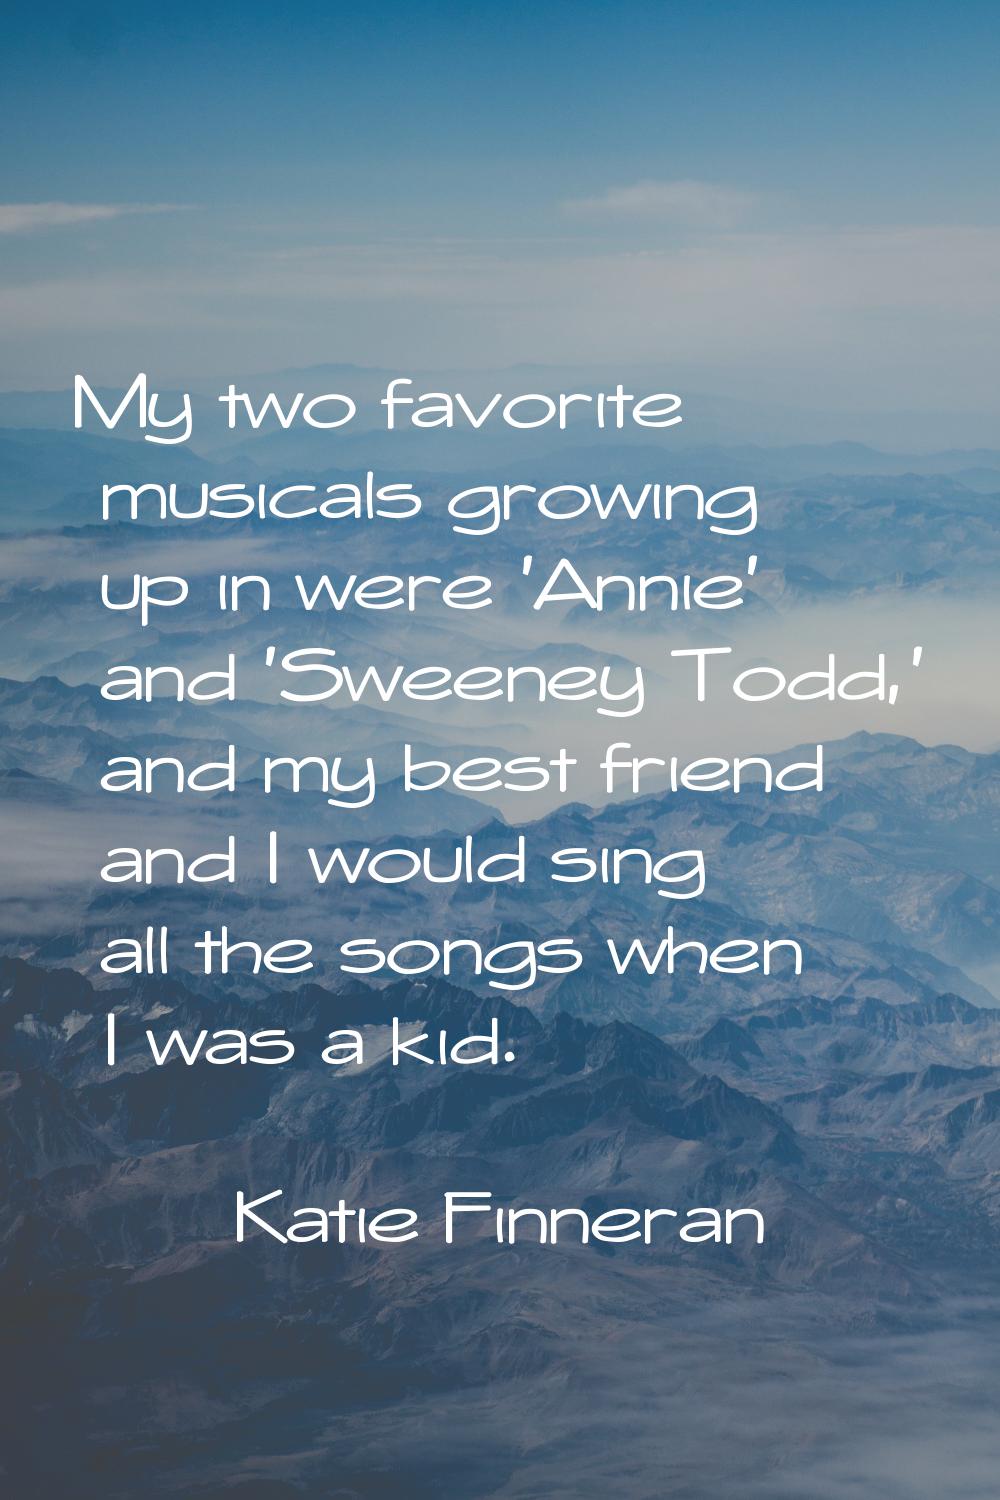 My two favorite musicals growing up in were 'Annie' and 'Sweeney Todd,' and my best friend and I wo